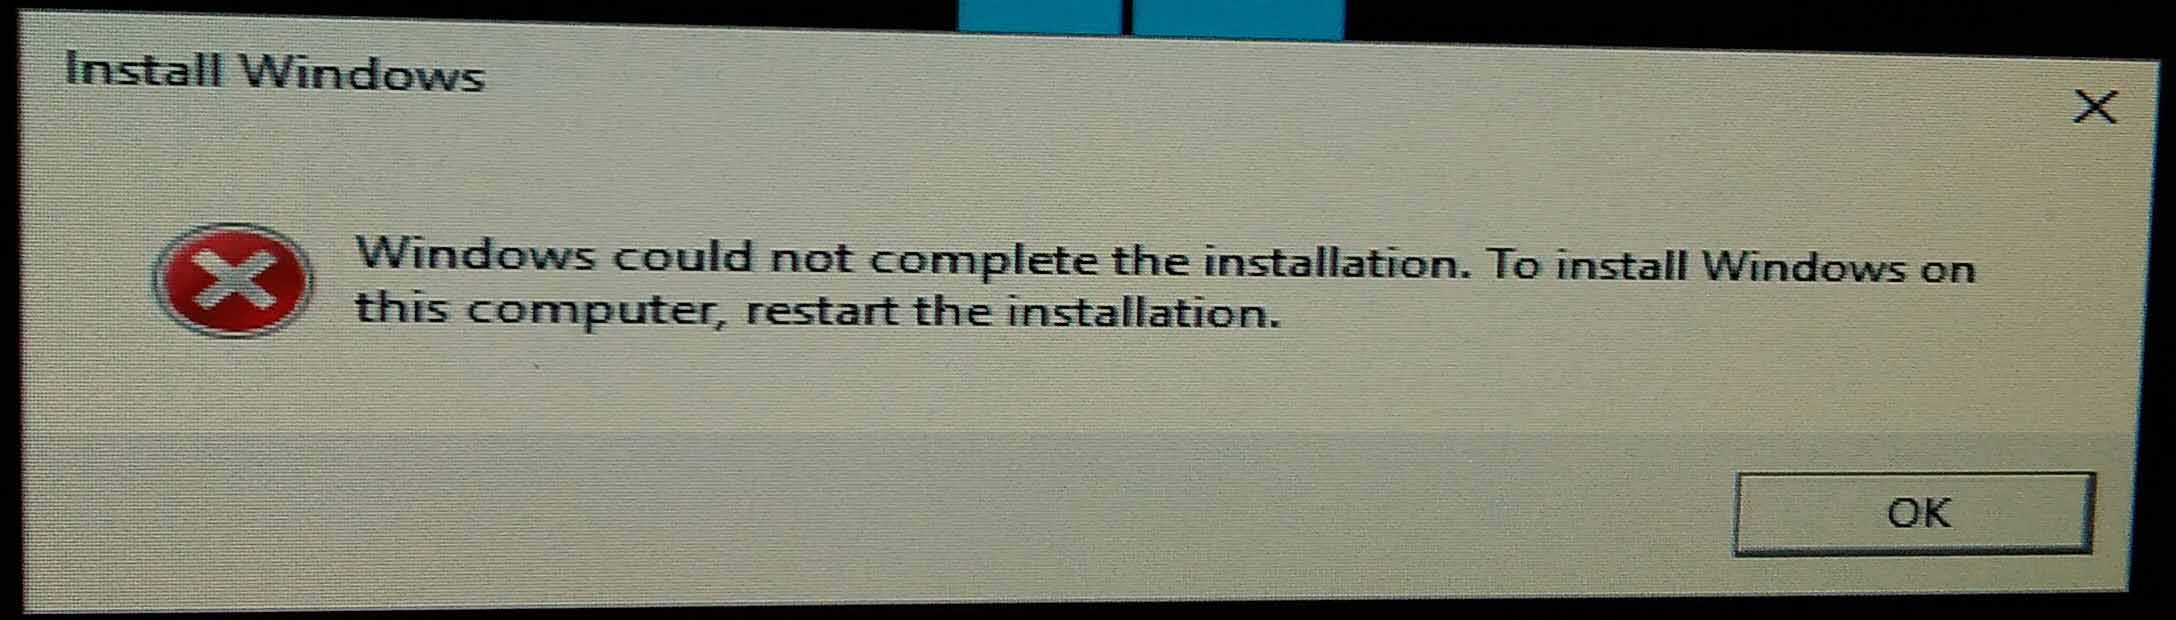 [SOLVED] EX-100 - Windows could not complete the installation 20171010